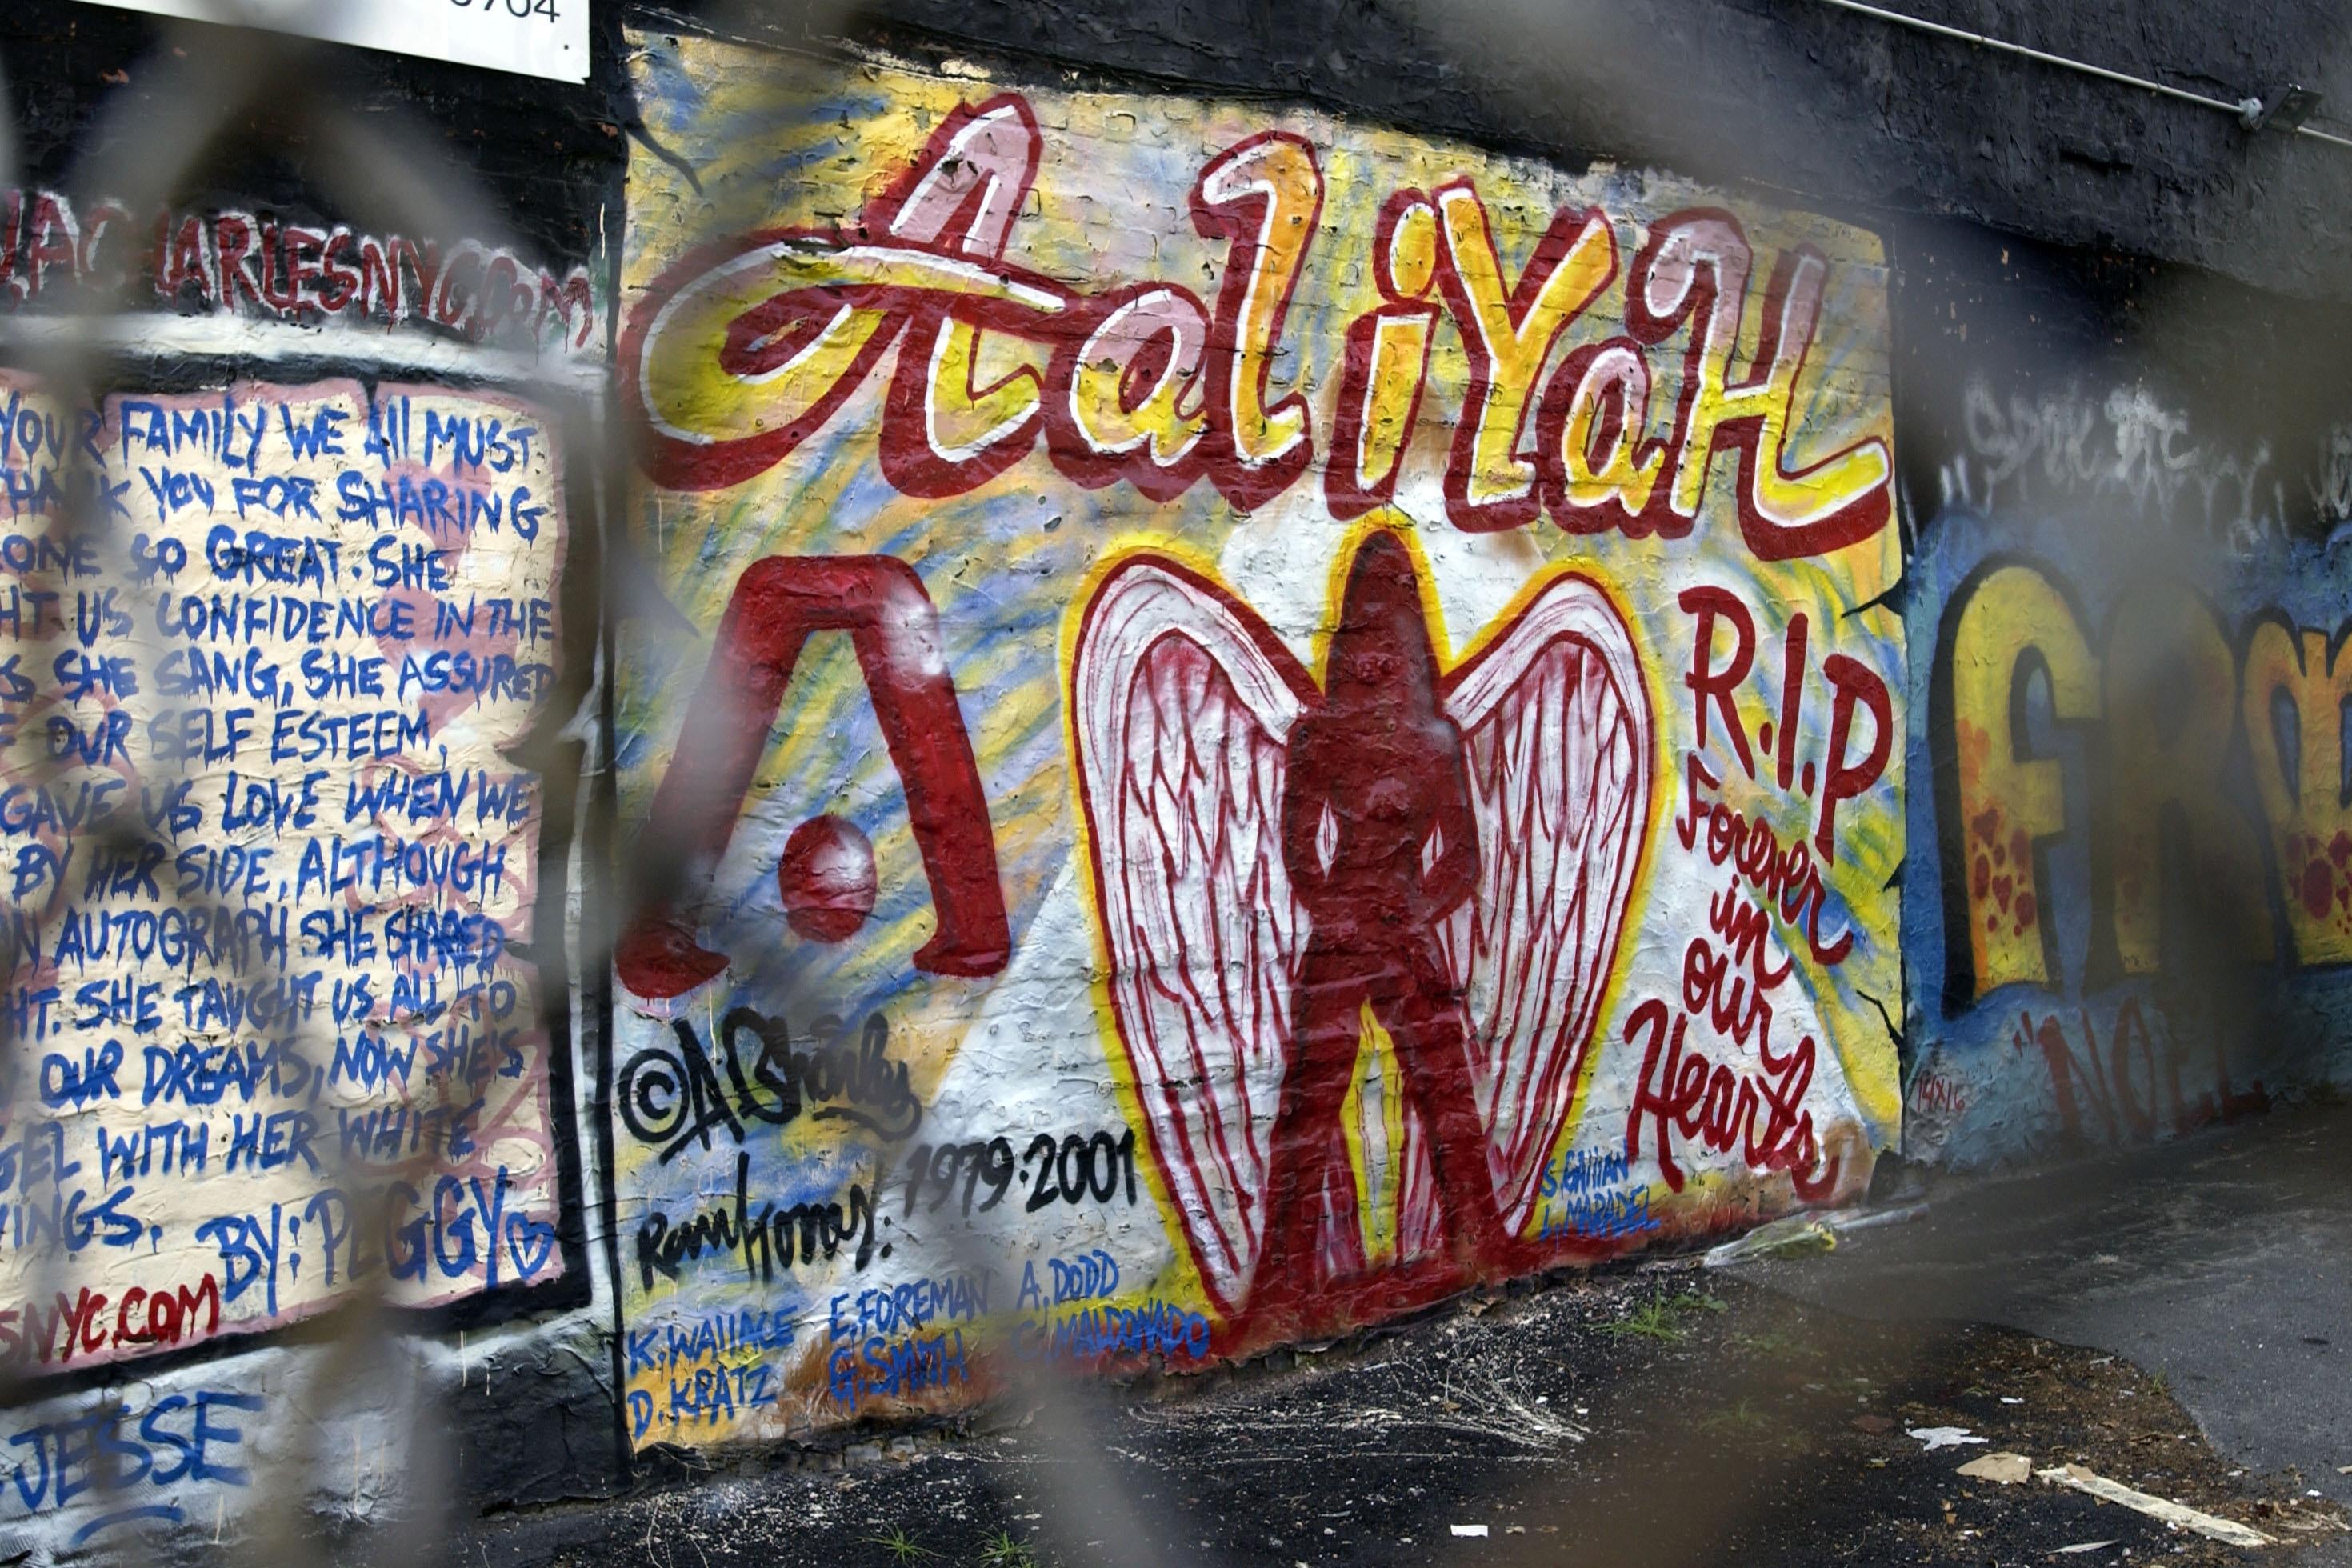 A memorial mural to Aaliyah is seen through a fence.